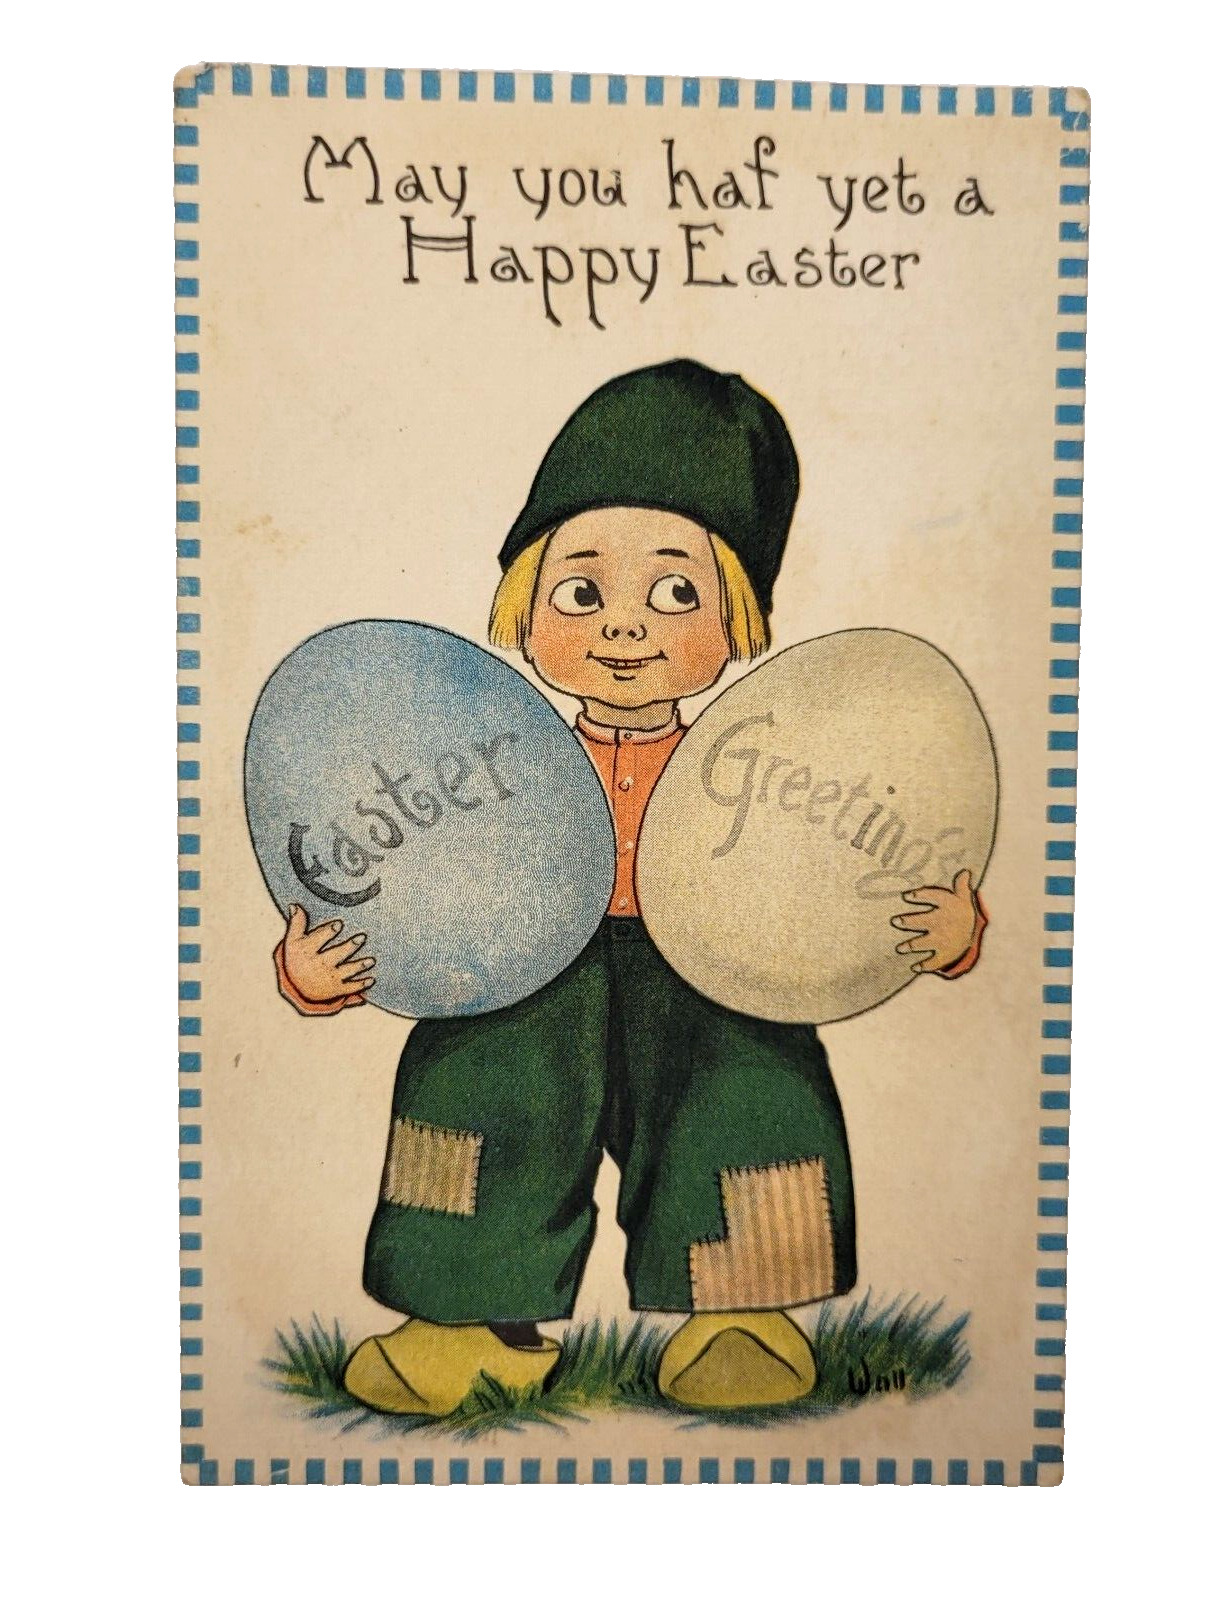 Dutch Boy with Easter Egg Greetings Happy Easter 1913 Postcard Cancel Stamp